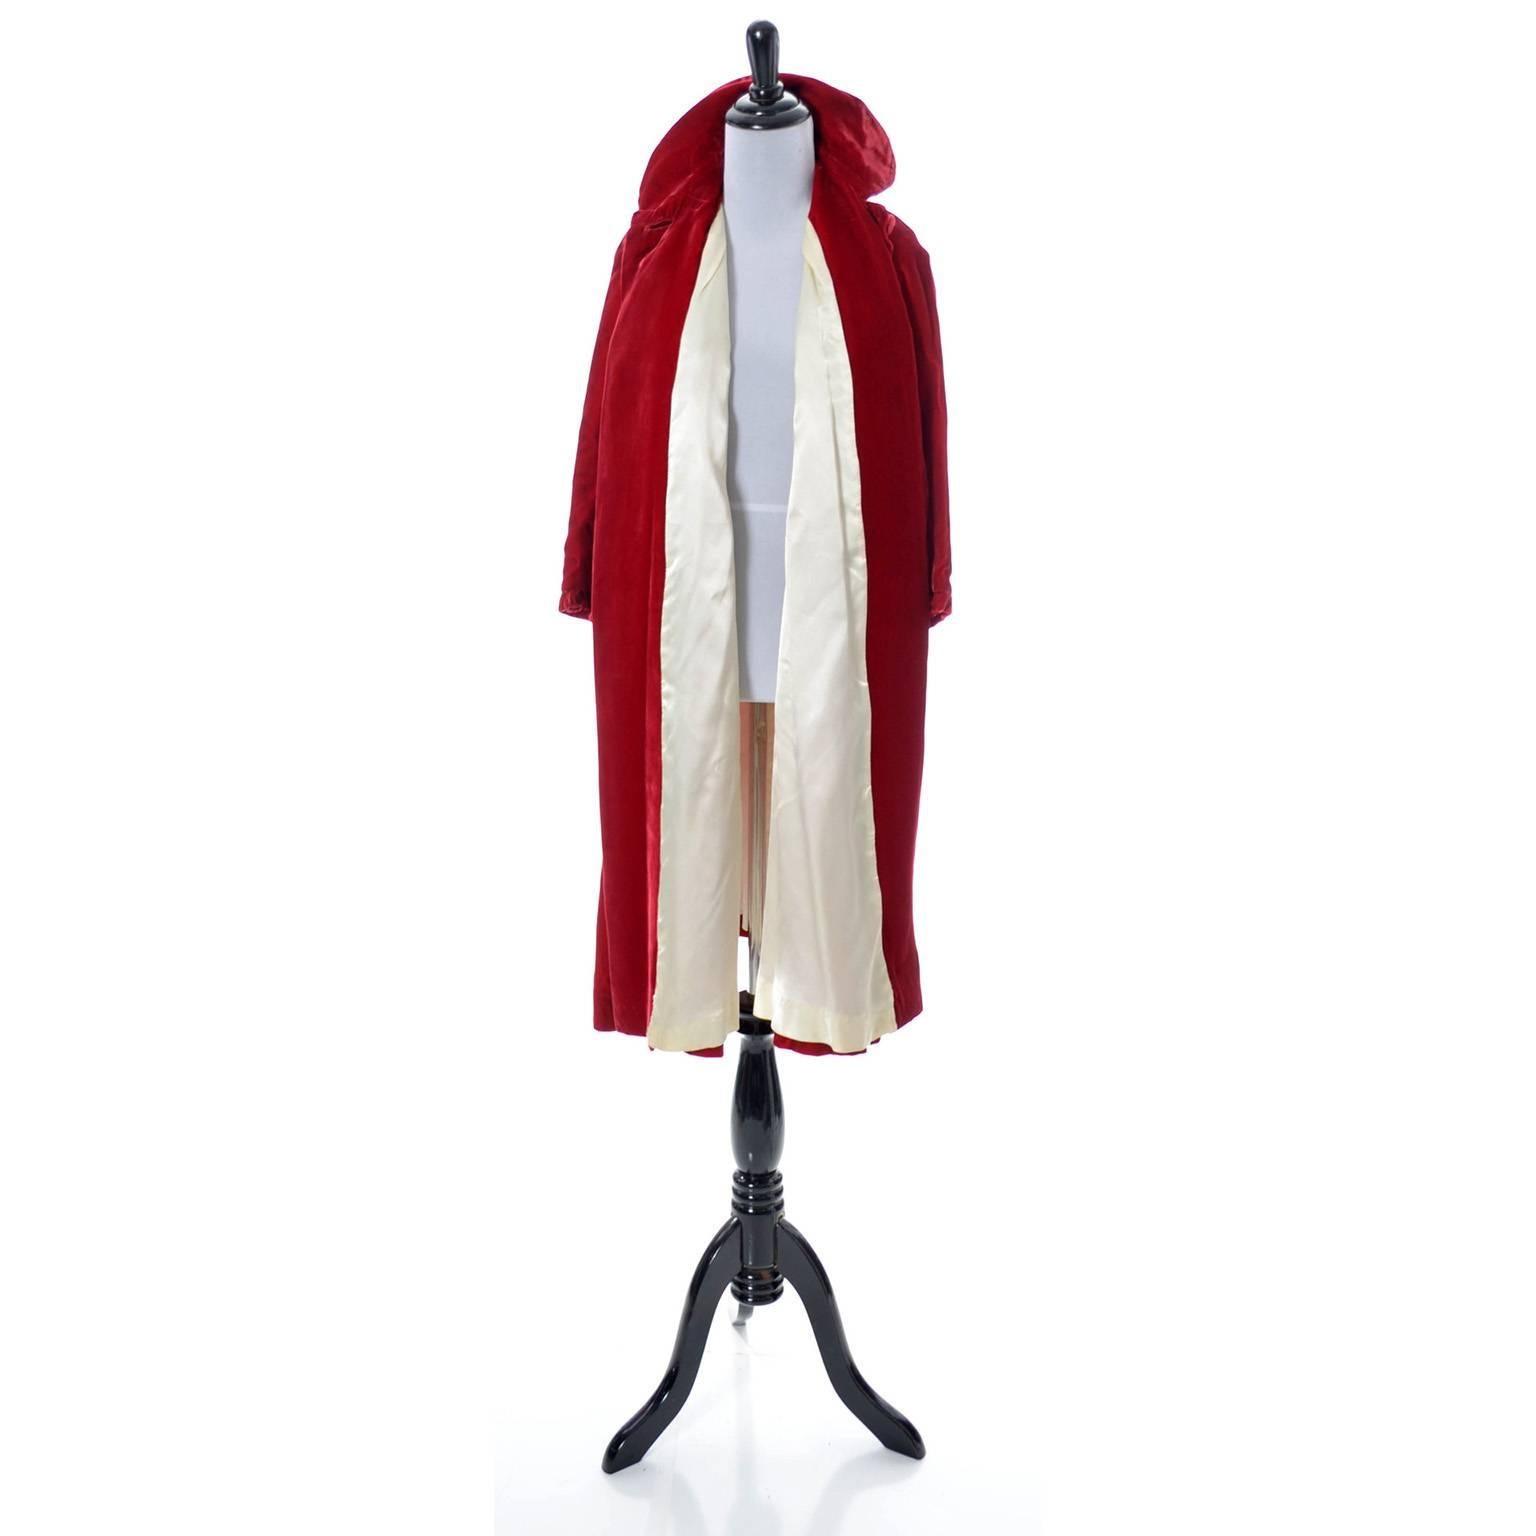 This is a luxe vintage holiday cherry red velvet coat with lovely ivory silk lining. This vintage opera coat was purchased at the Northwest department store Meier and Frank in the 1960's.  There are pretty fabric covered buttons and pockets - the